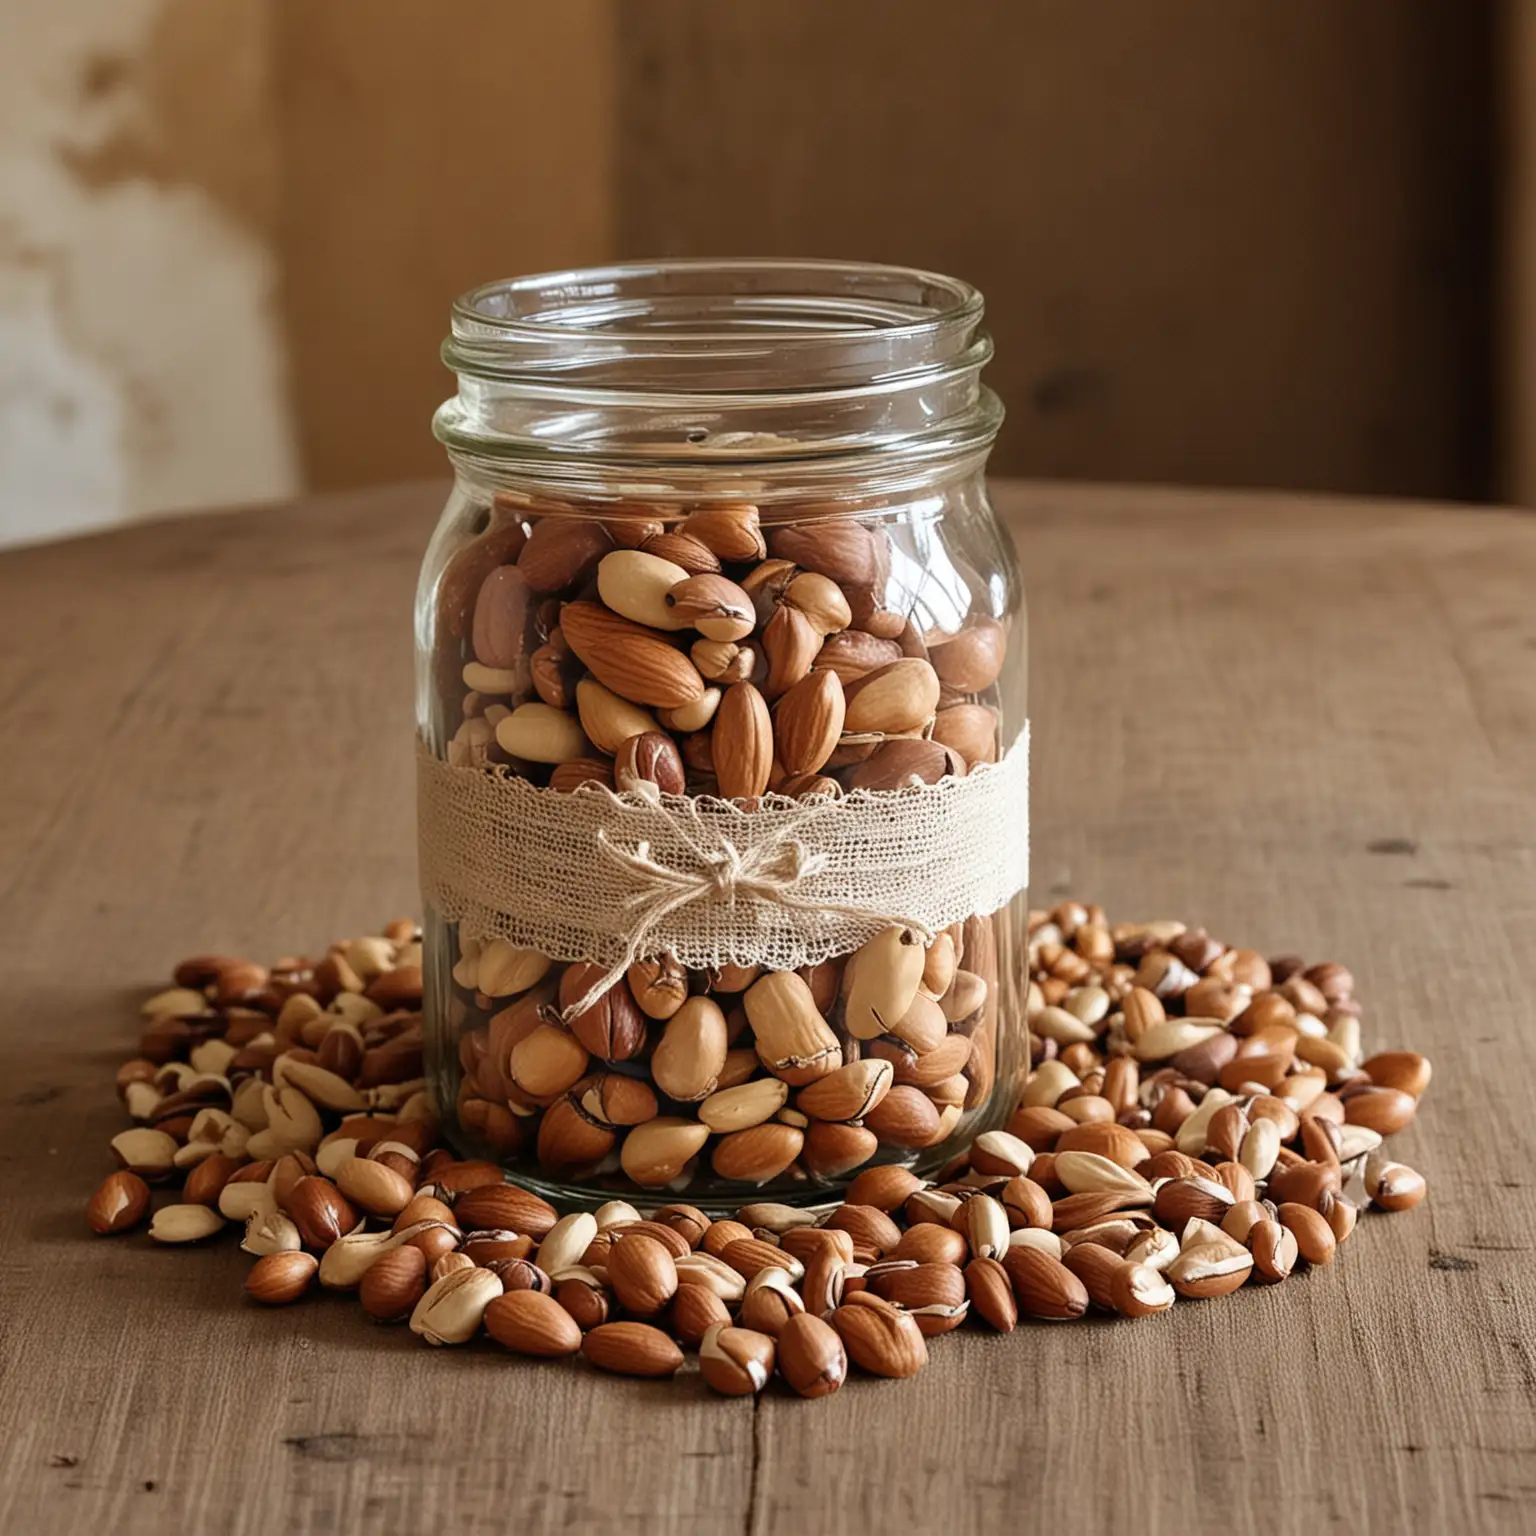 a rustic wedding centerpiece with a jar filled with nuts